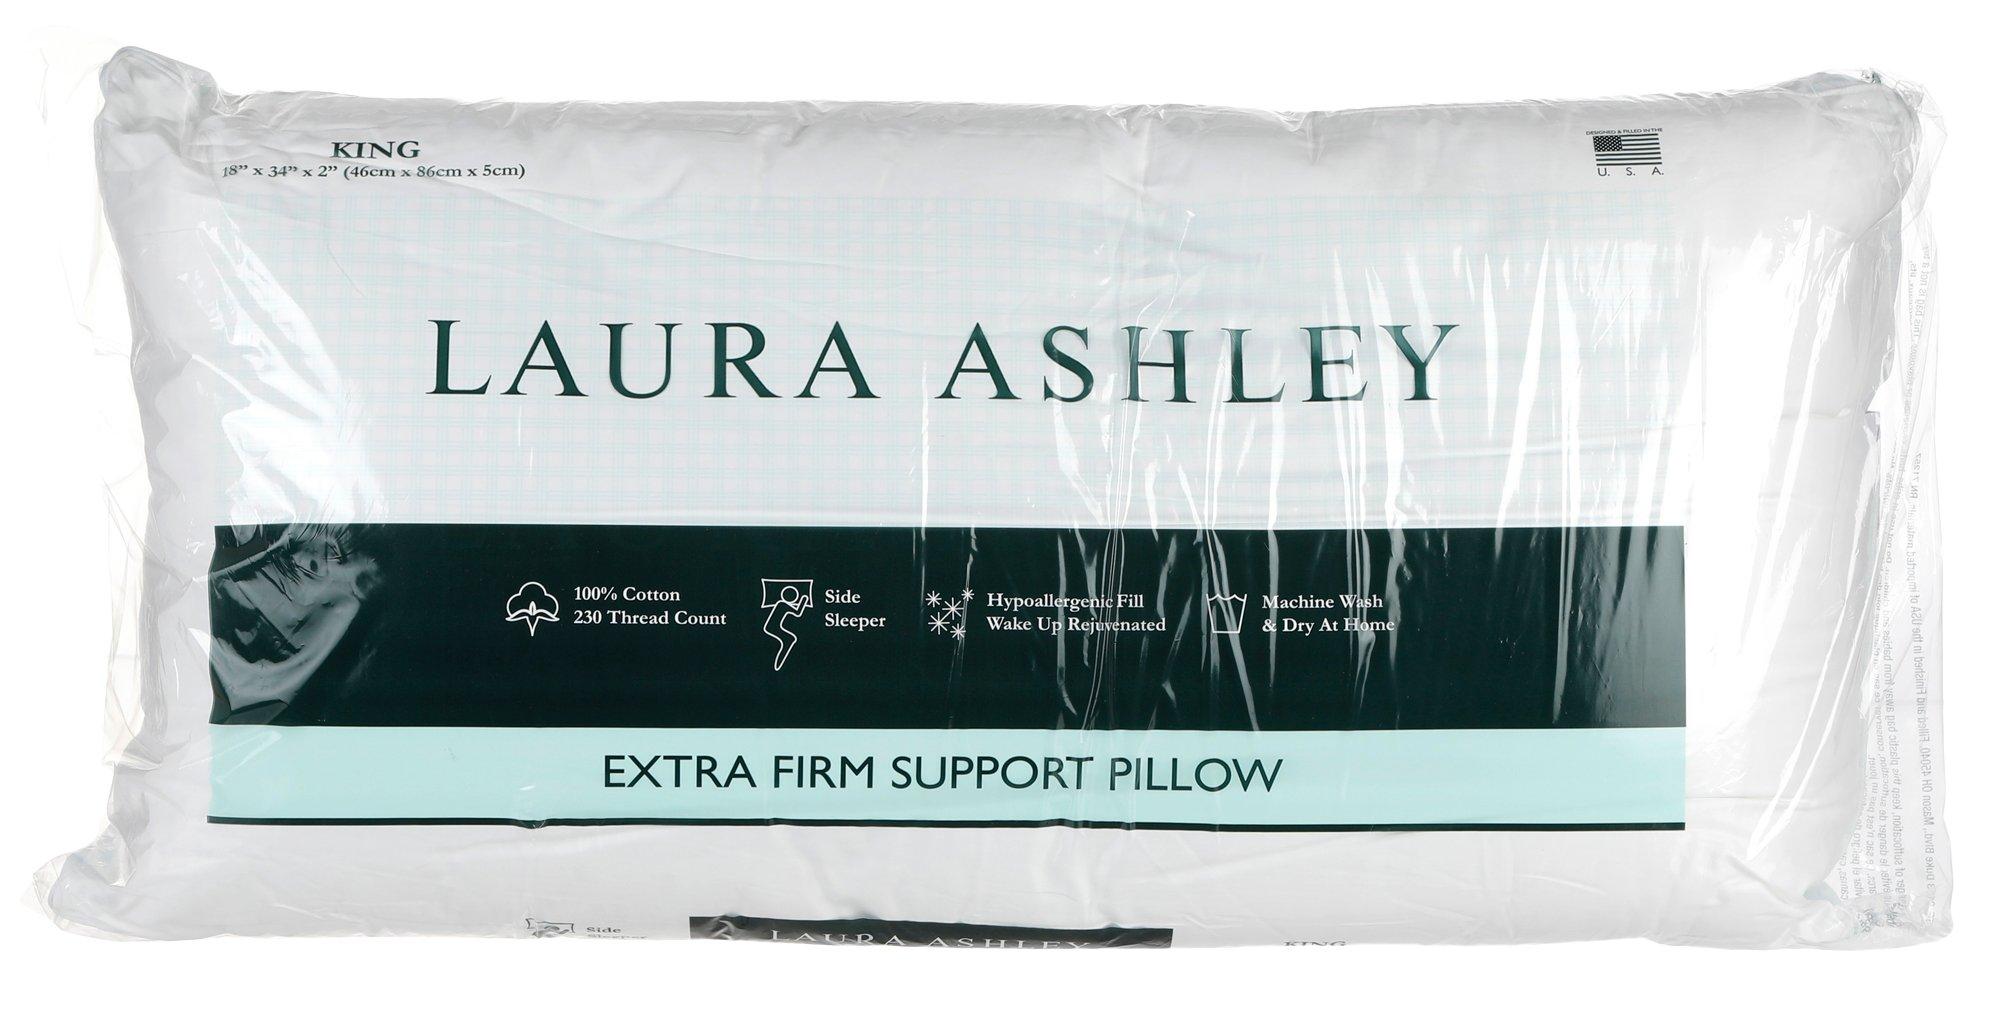 King Extra Firm Support Pillow | Burkes 